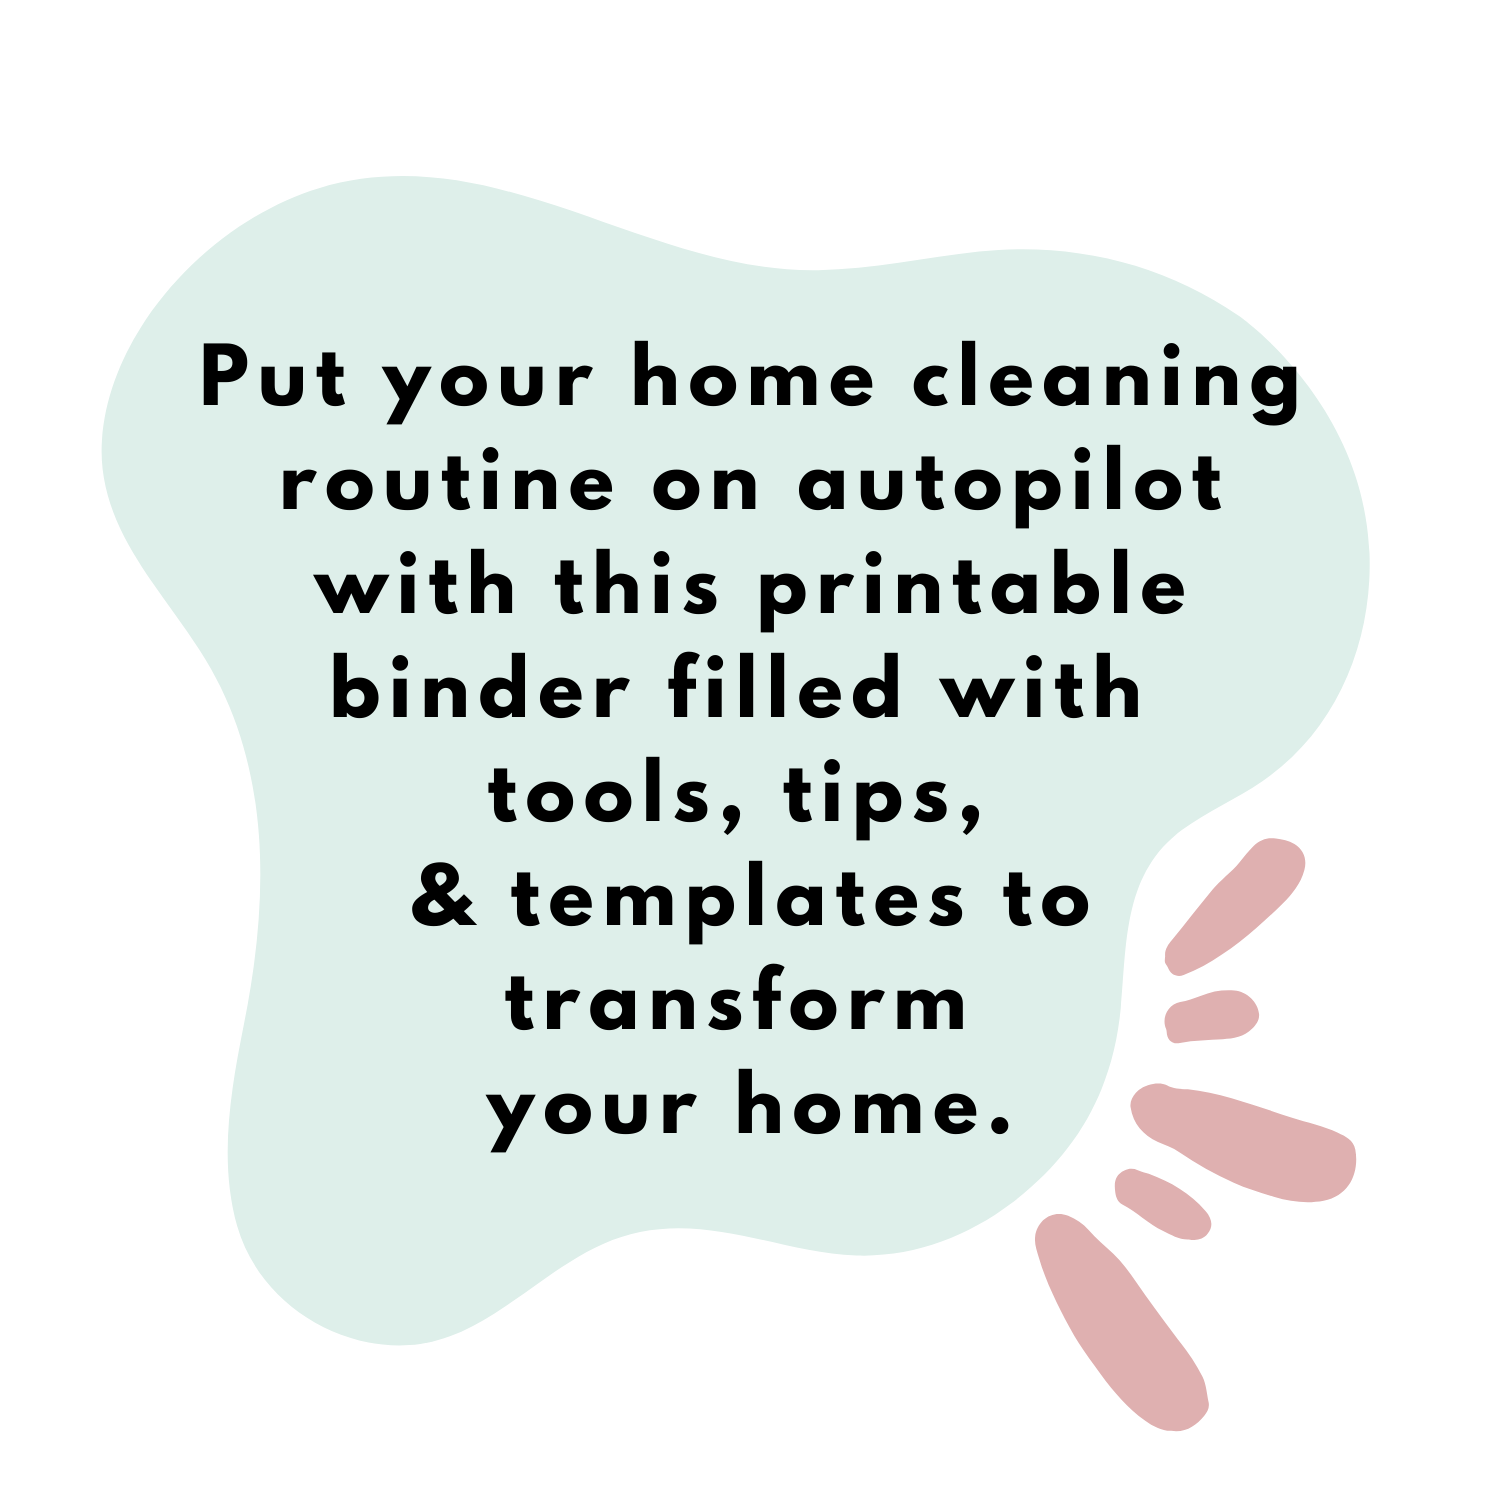 Printable Cleaning Binder product description